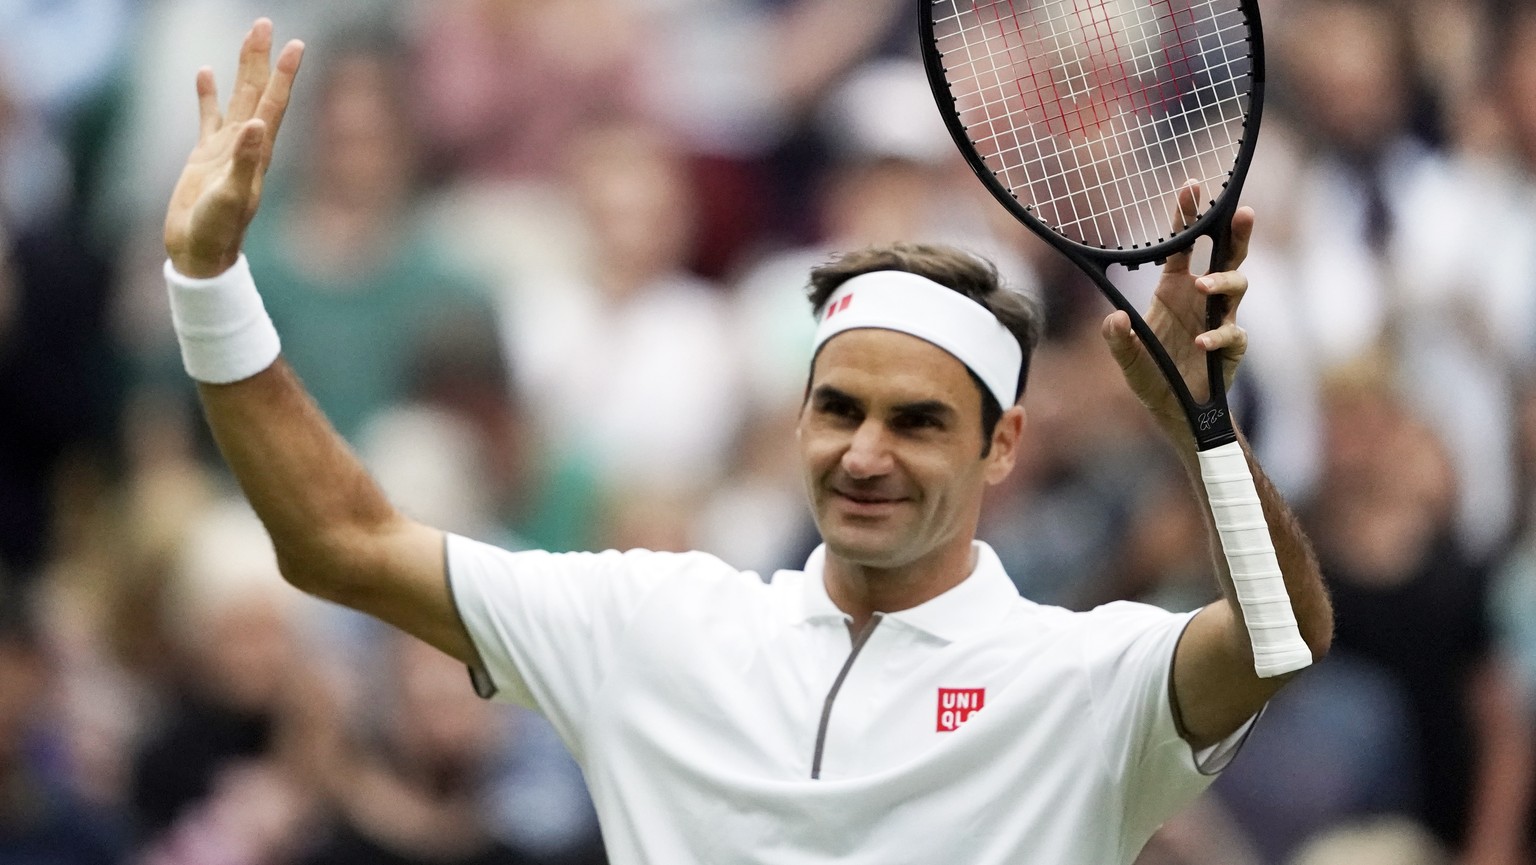 epa07704142 Roger Federer of Switzerland celebrates his win over Matteo Berrettini of Italy in their fourth round match during the Wimbledon Championships at the All England Lawn Tennis Club, in Londo ...